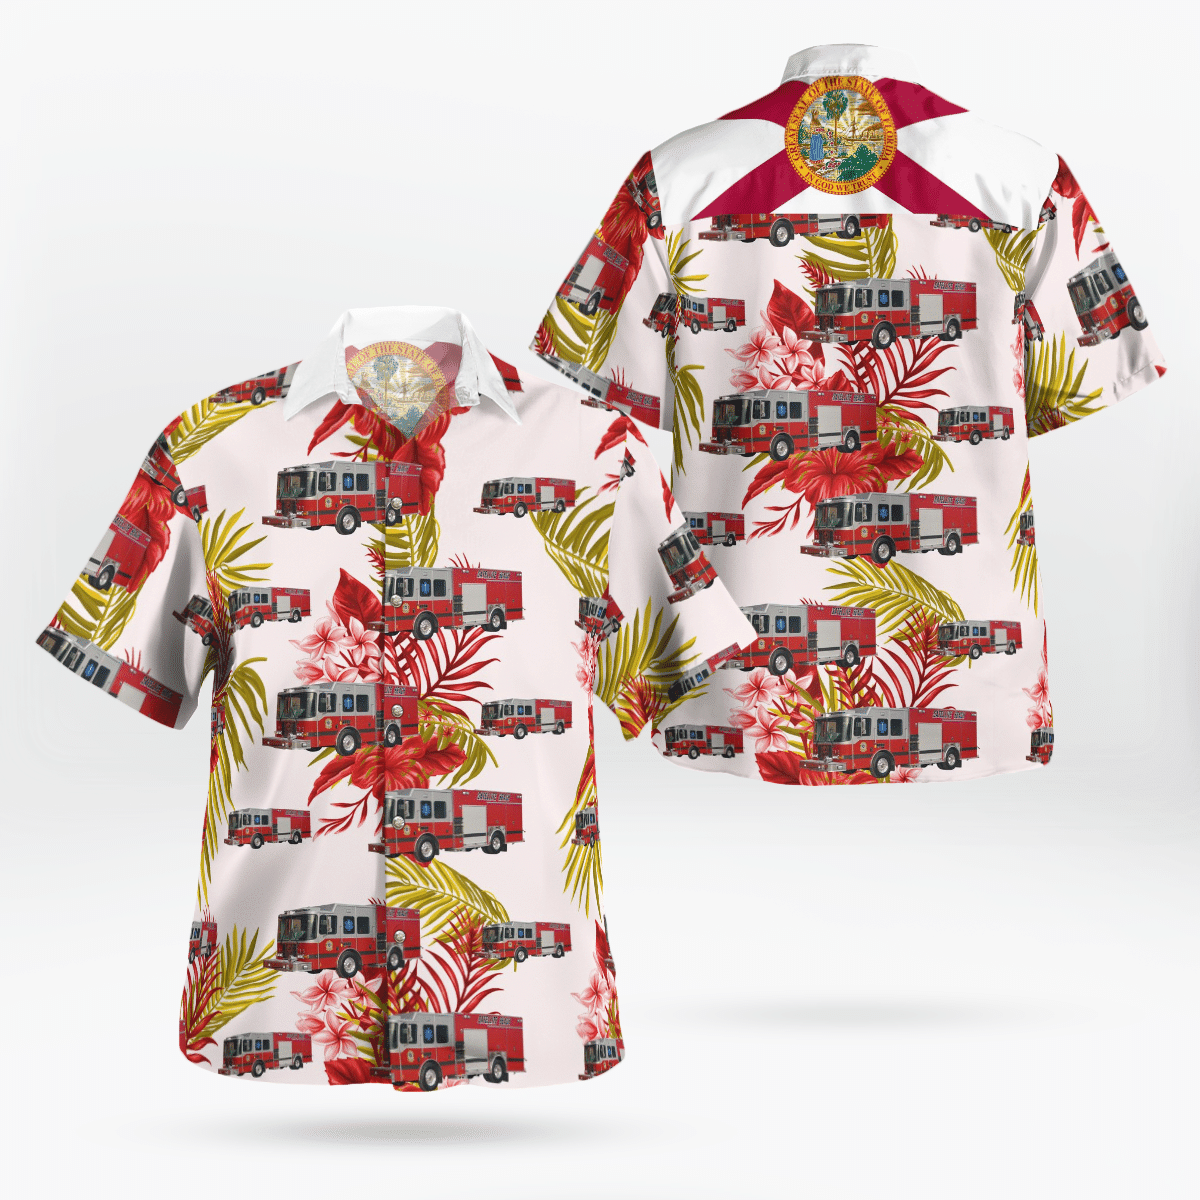 If you are in need of a new summertime look, pick up this Hawaiian shirt 36